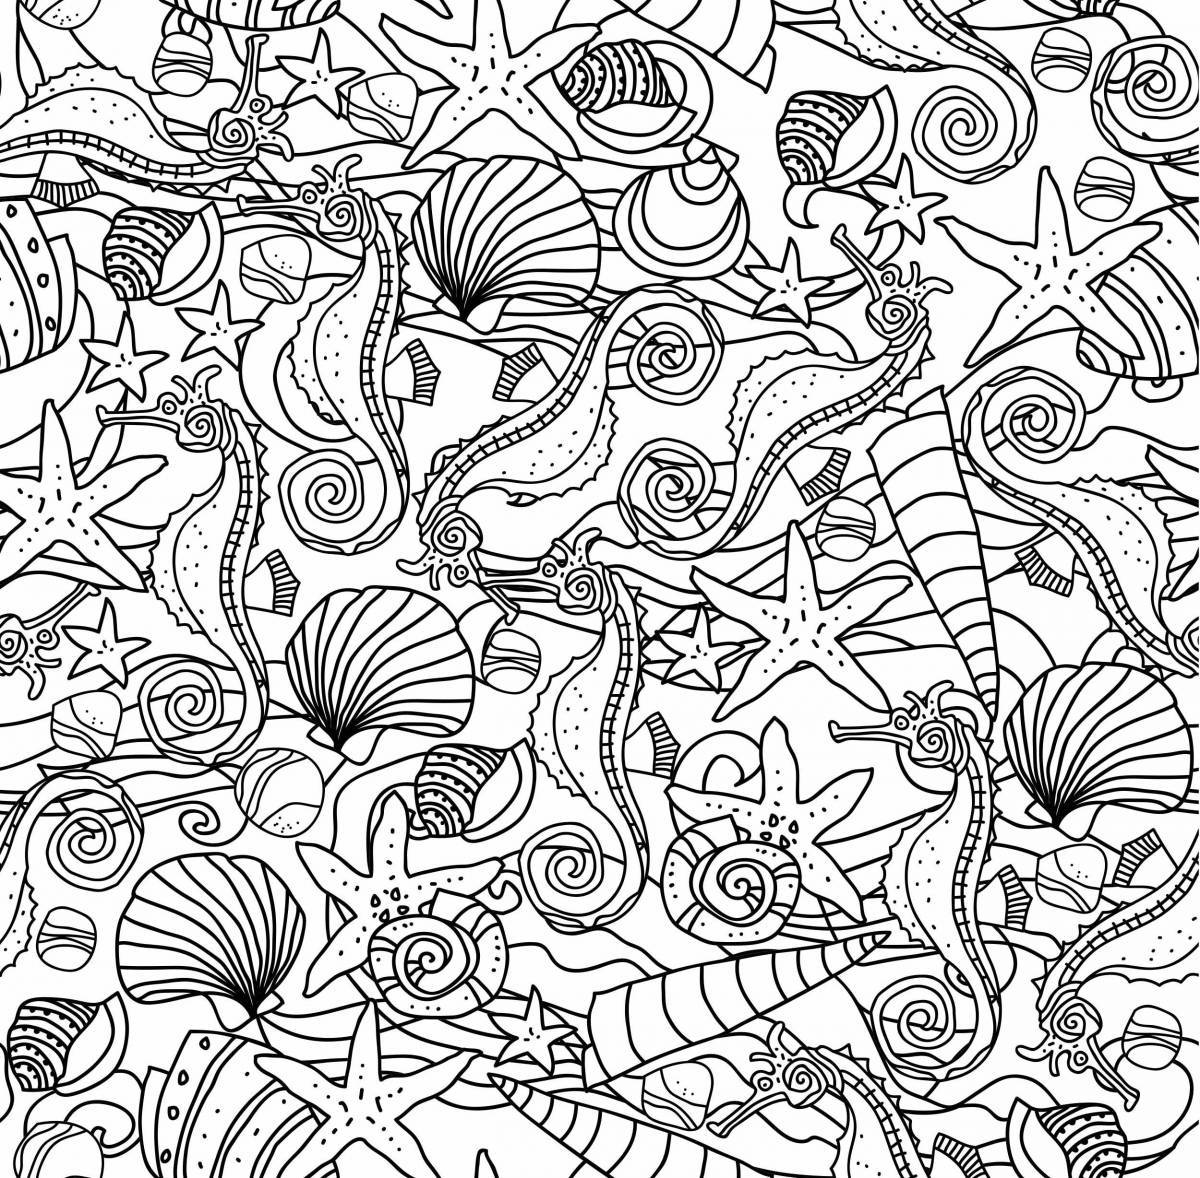 Exquisite wallpaper for coloring